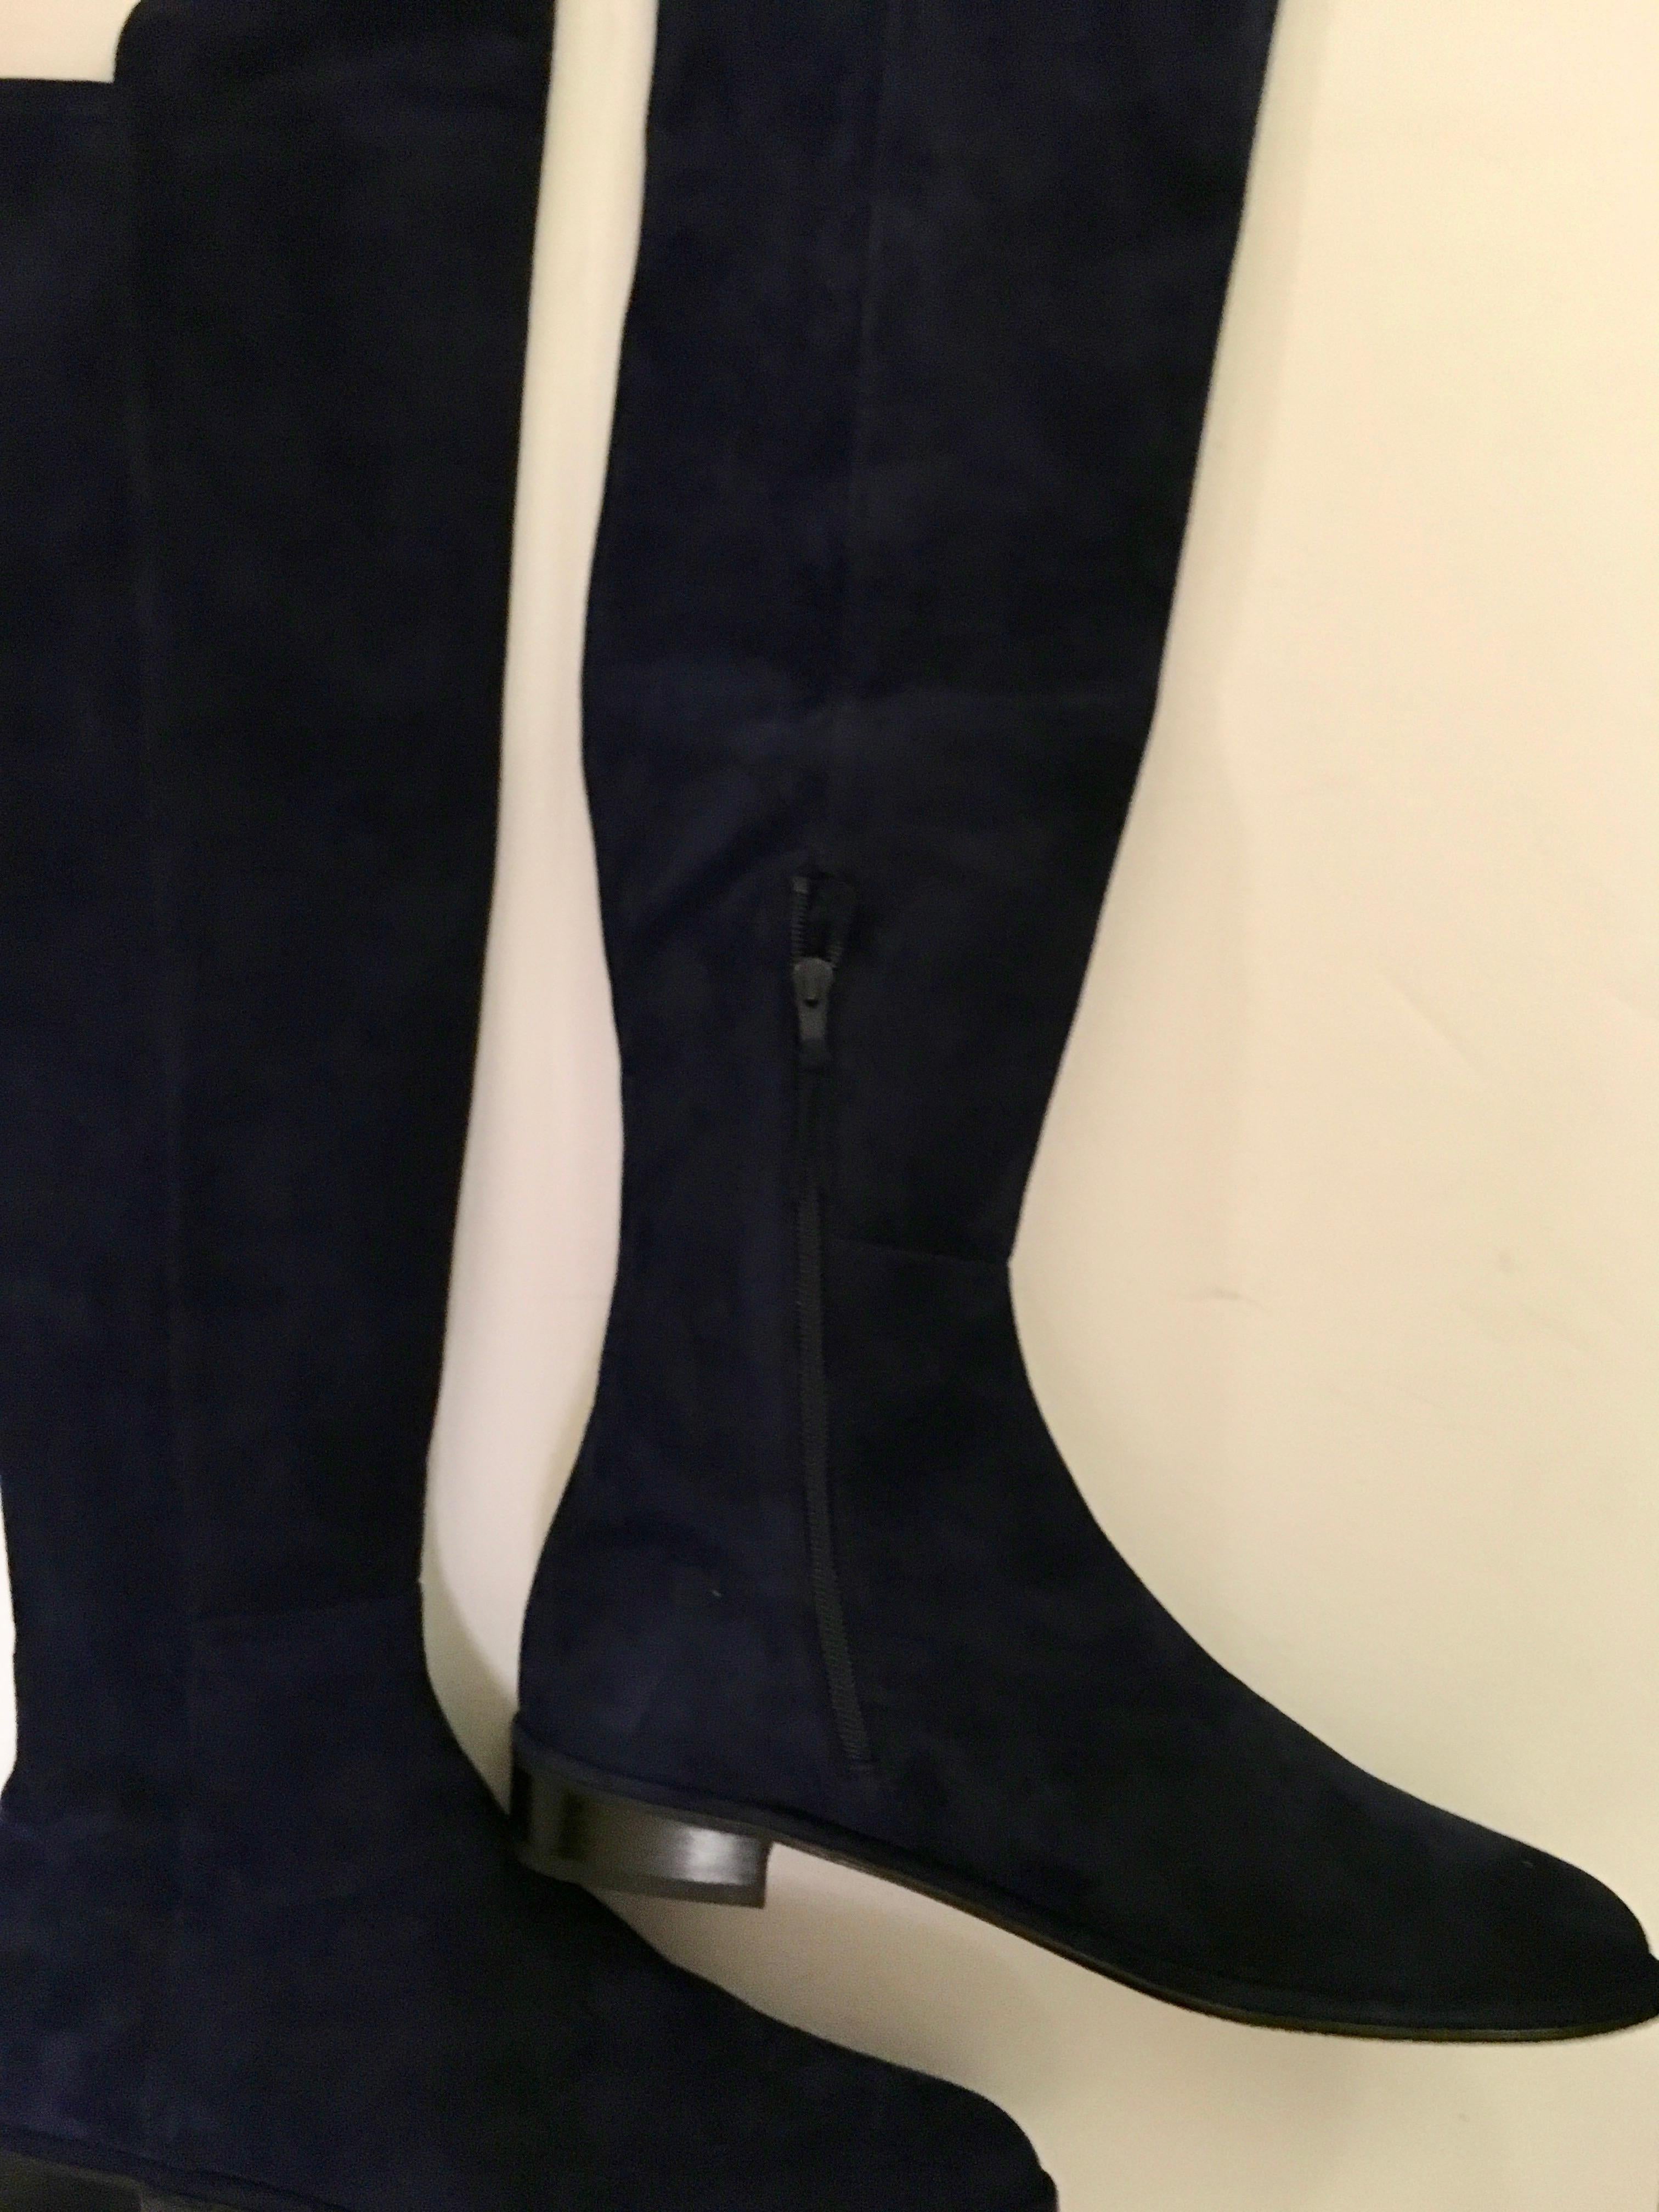 Presented here are the iconic boots that Stuart Weitzman is known for. We have them available in size 8.5 M and 11 M. Both boots have an interior zipper of 9 inches. The overall length of the boot including the heel is 25 inches. There is a 1 inch